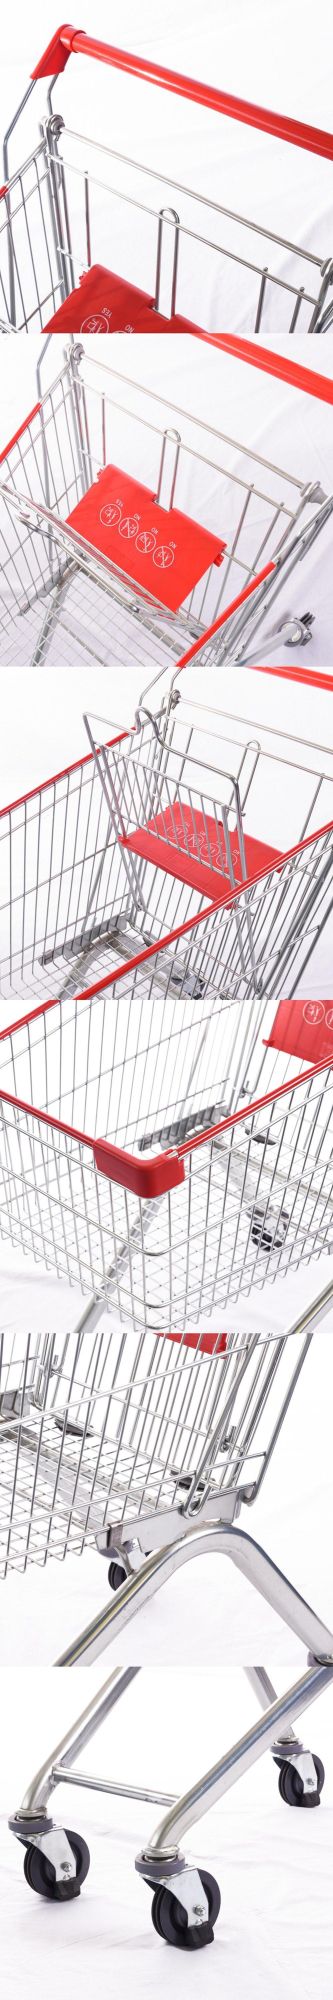 Grocery Store Best Price Shopping Cart Supermarket Trolley